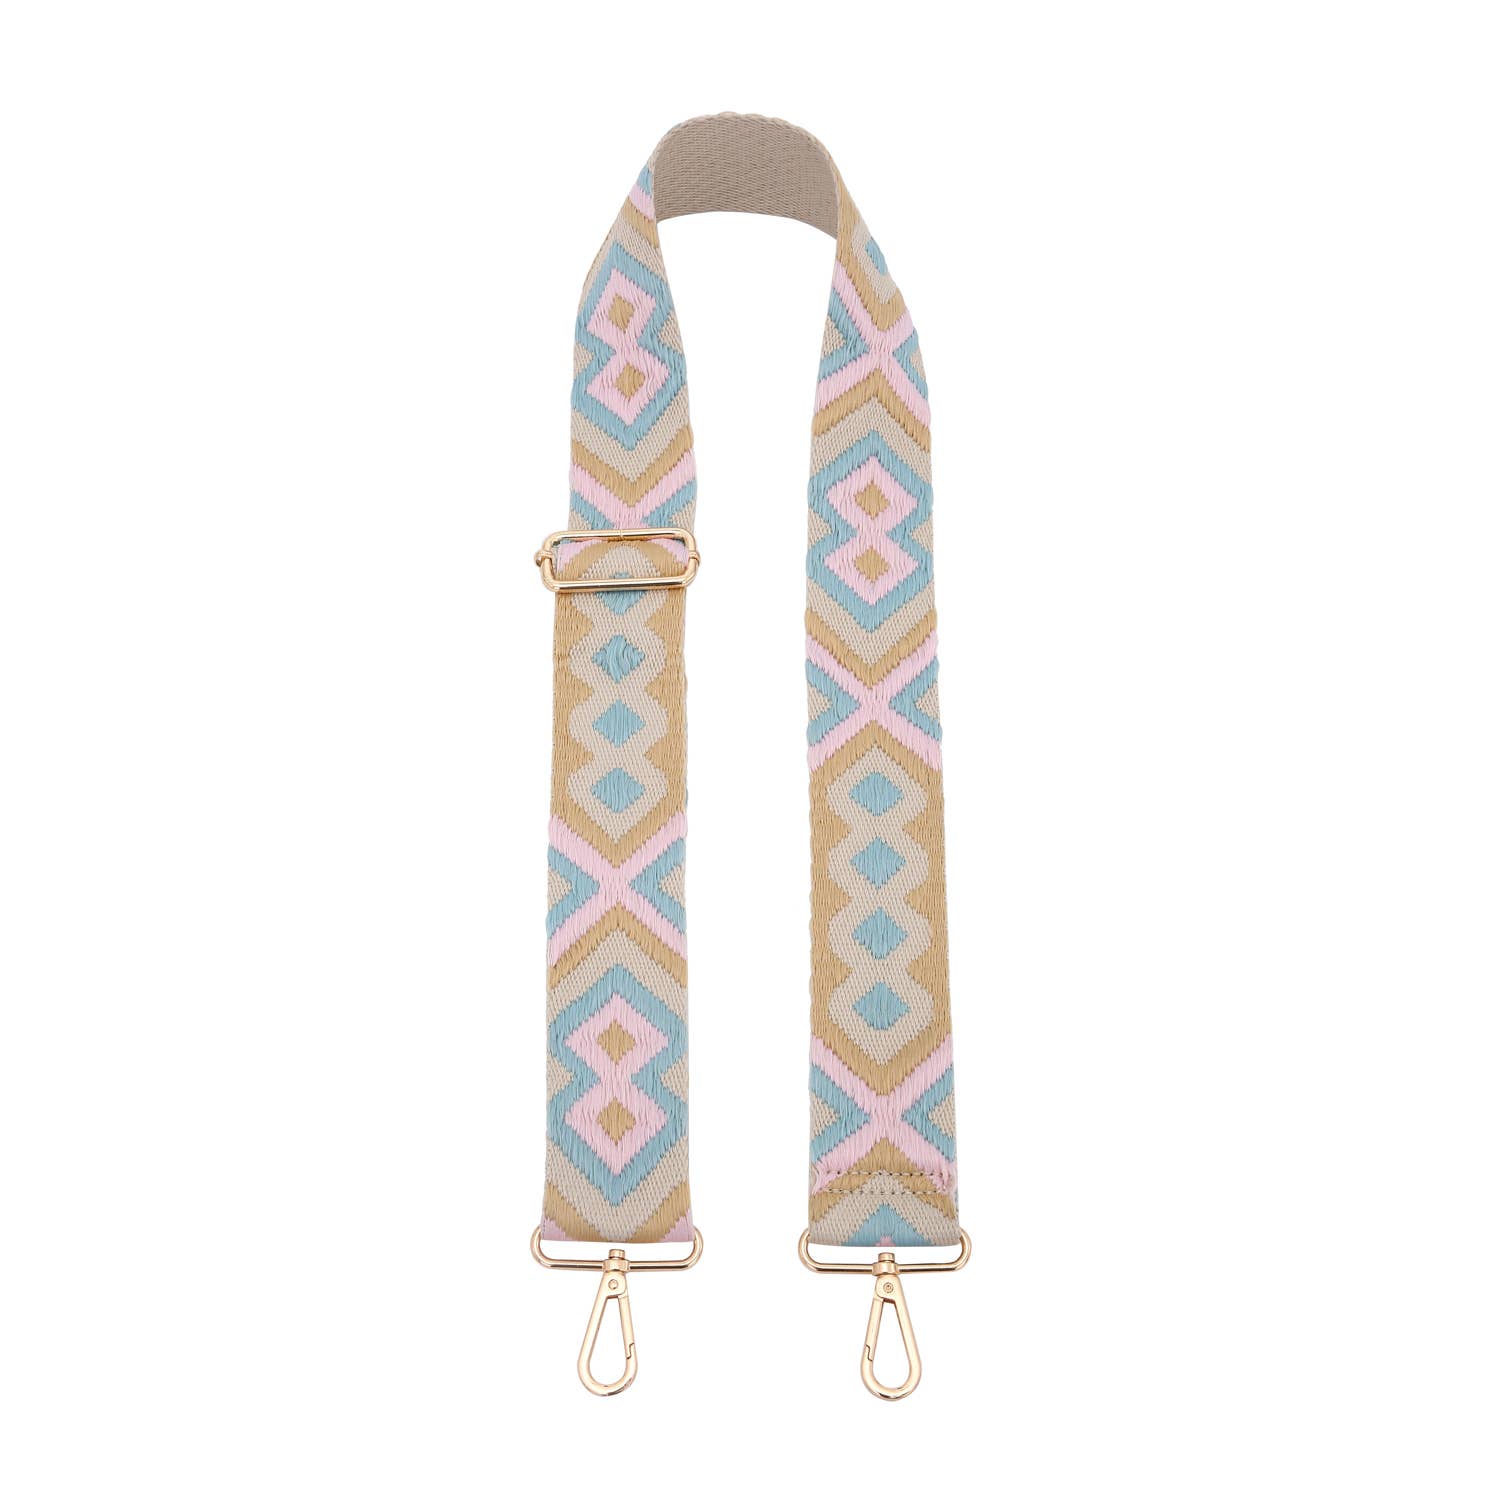 Embroidered Guitar Strap